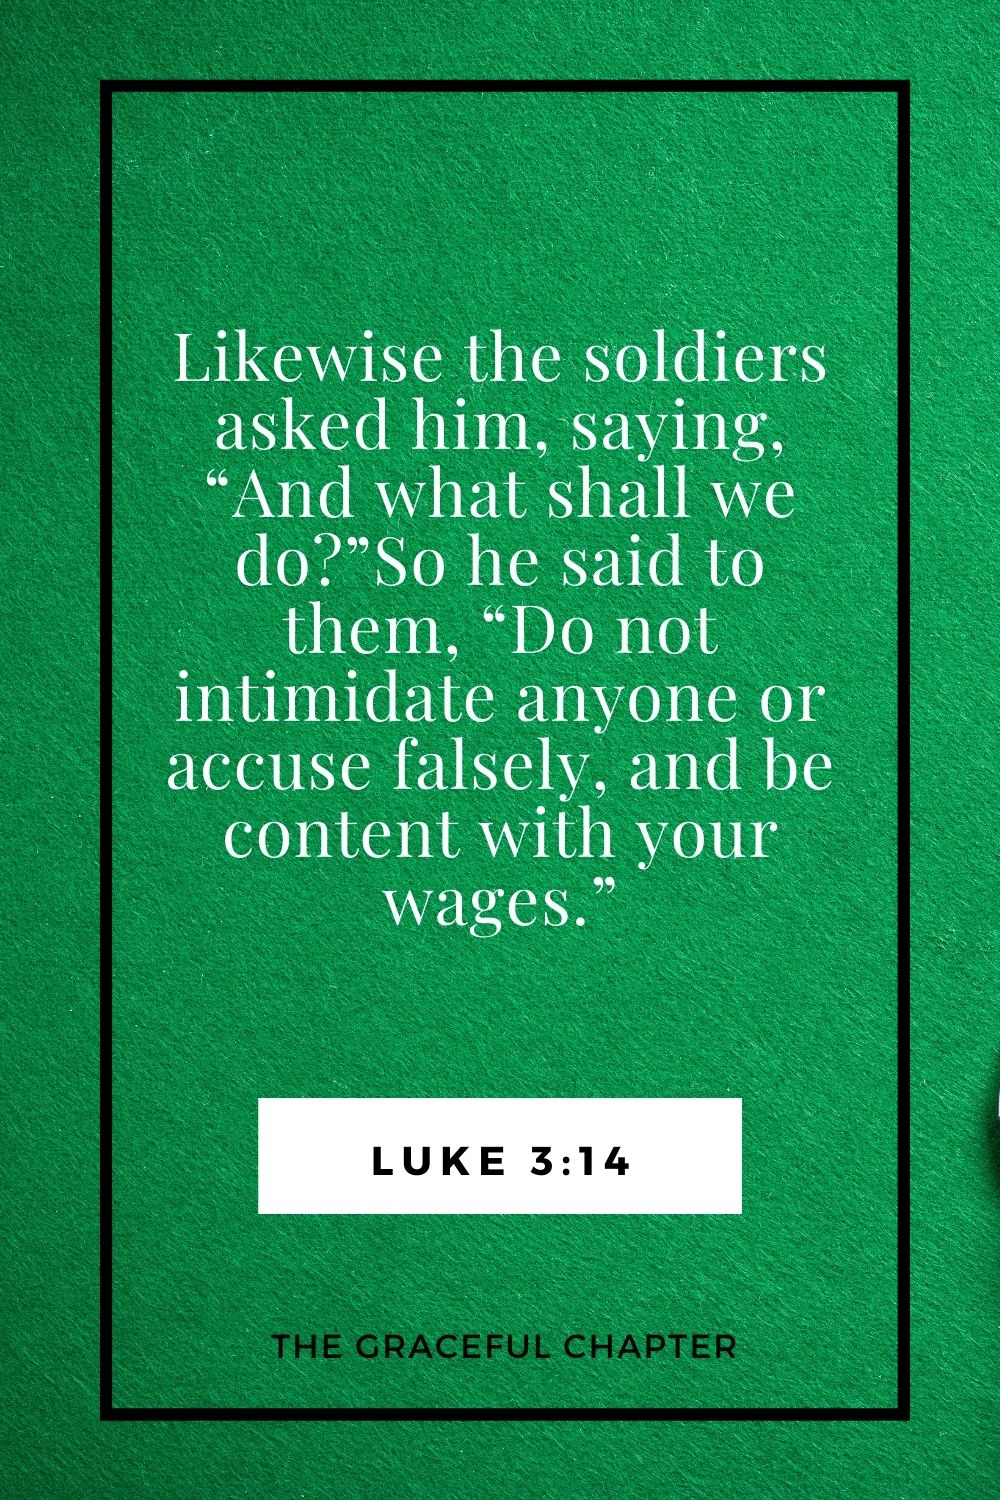 Likewise, the soldiers asked him, saying, “And what shall we do?”So he said to them, “Do not intimidate anyone or accuse falsely, and be content with your wages.” Luke 3:14